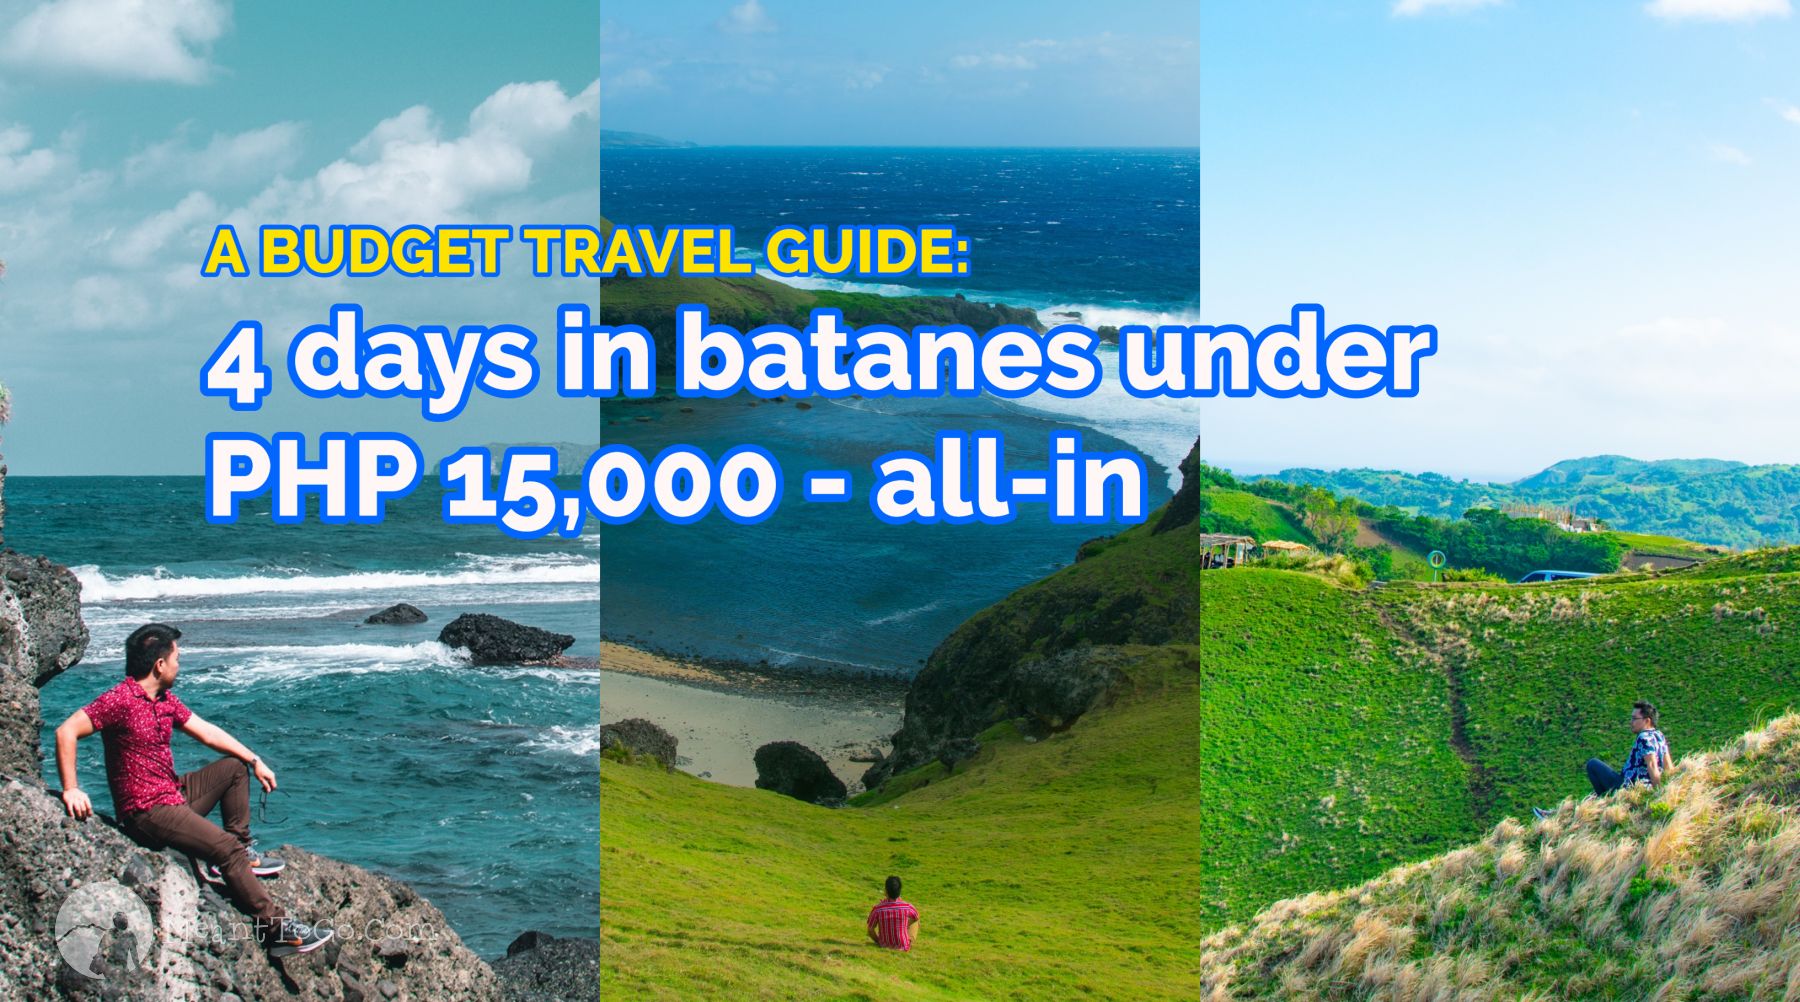 Batanes budget travel guide and tips